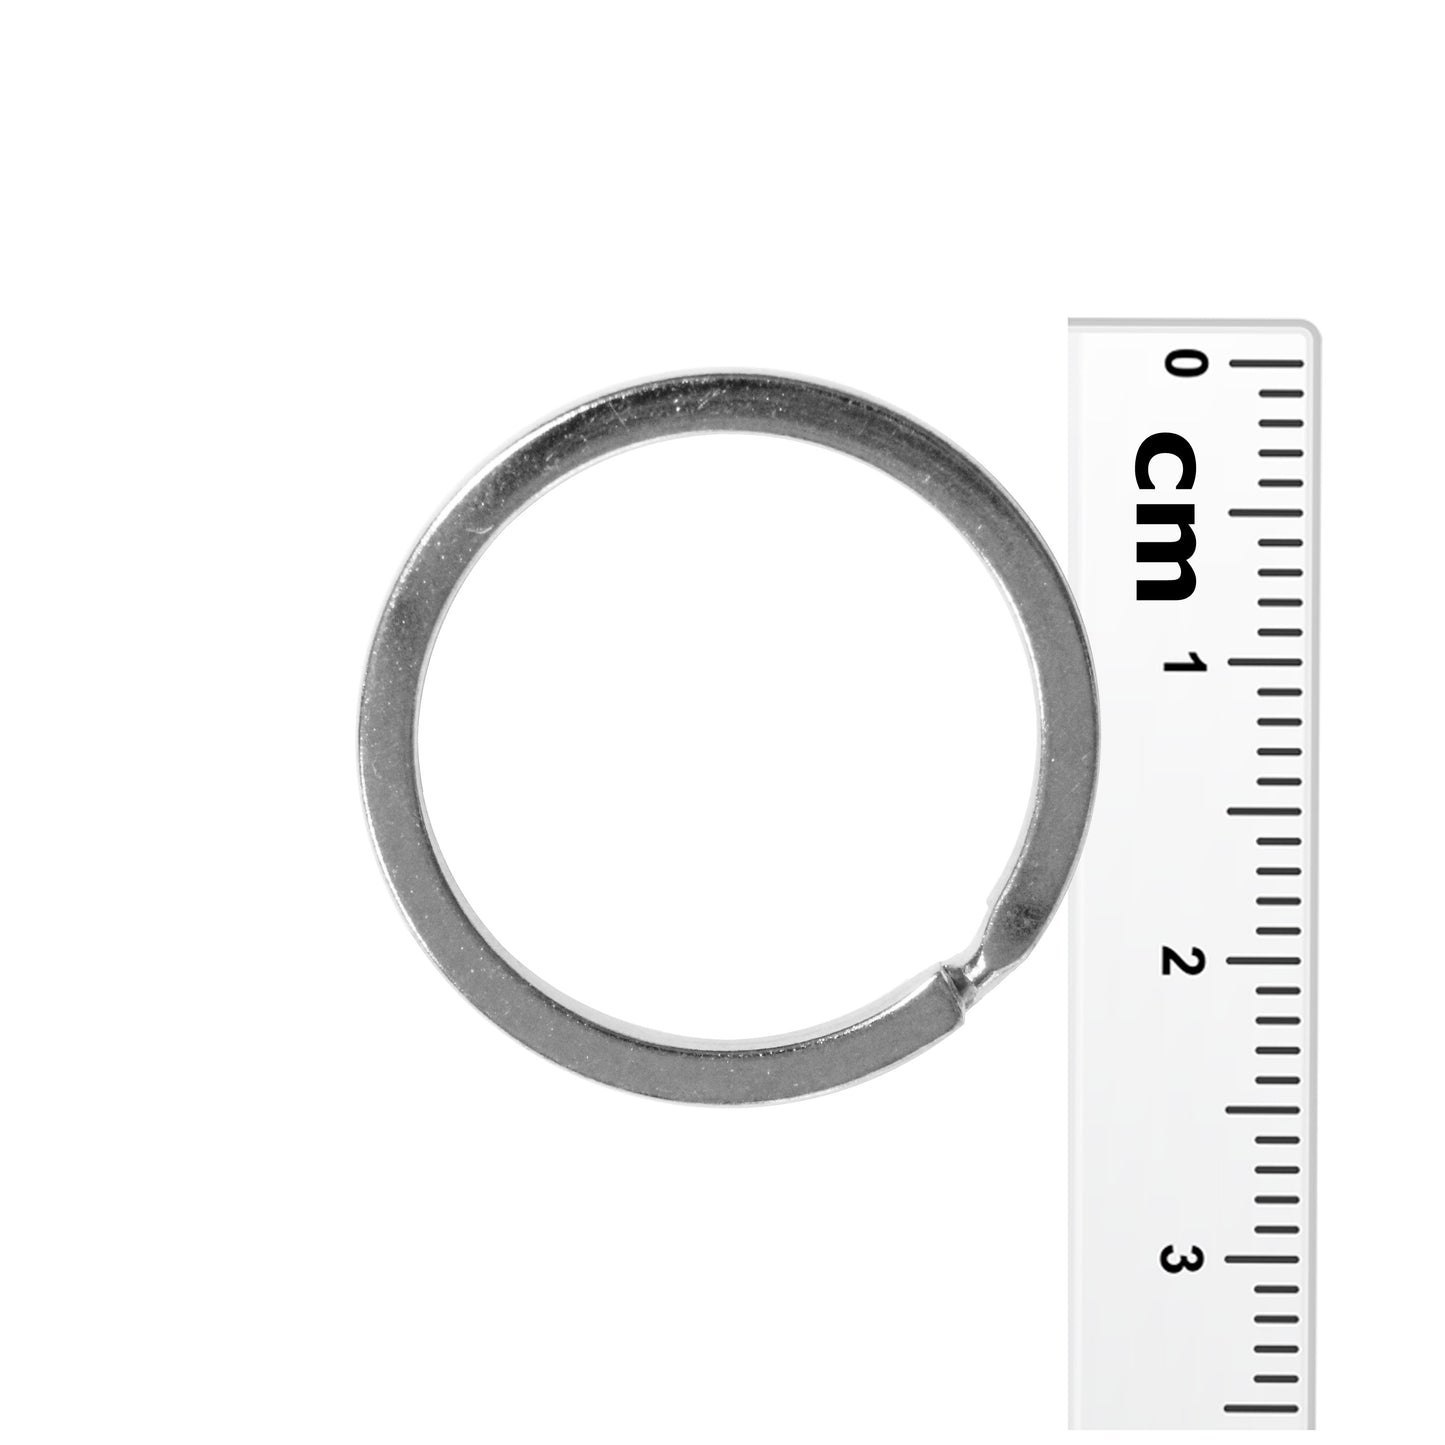 25mm Bright Rhodium Split Ring / sold individually / for key rings or secure charms or tags